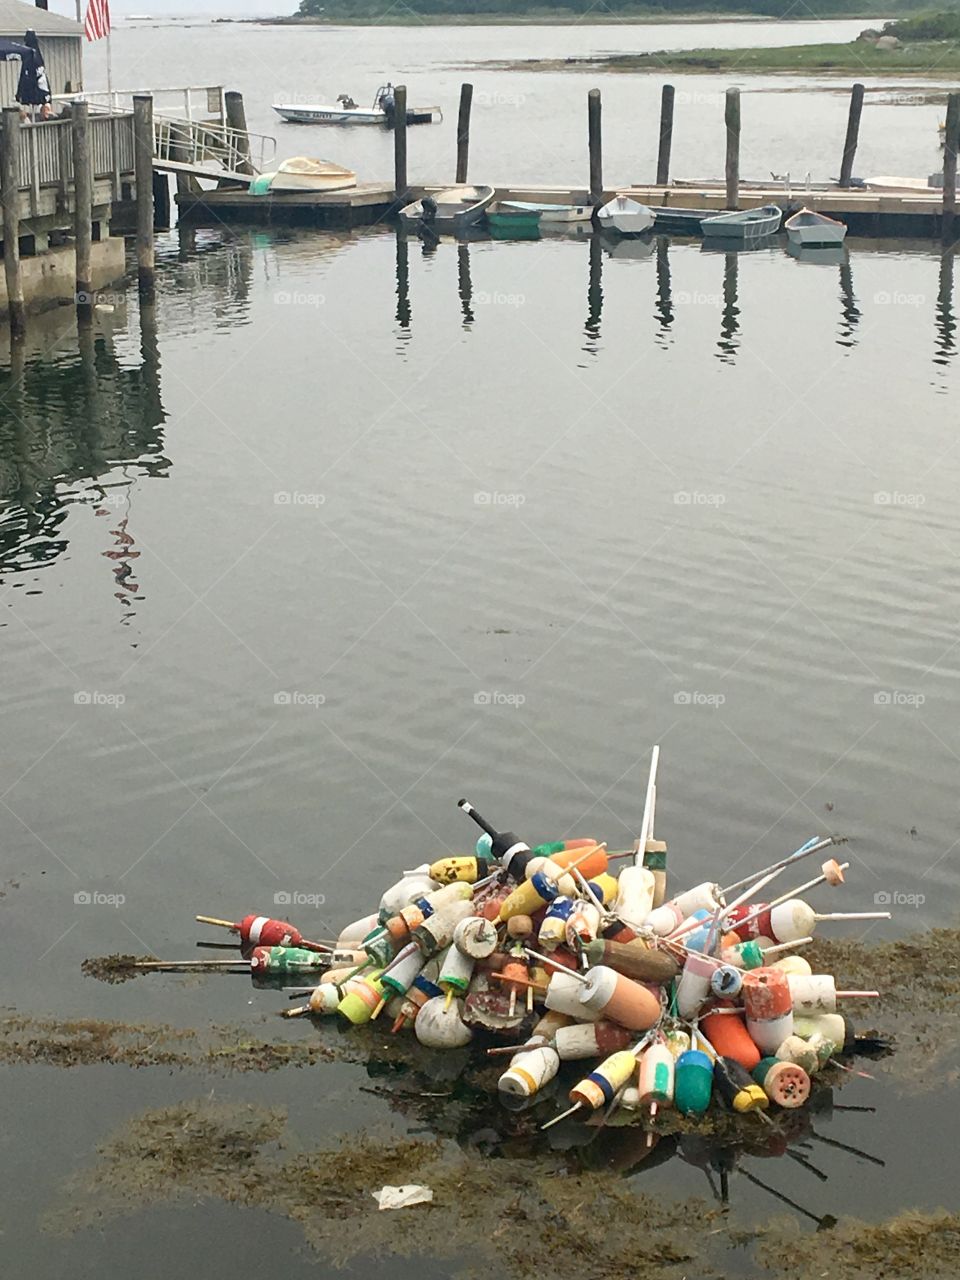 A cluster of lobster buoys sits in the shallow waters near a dock